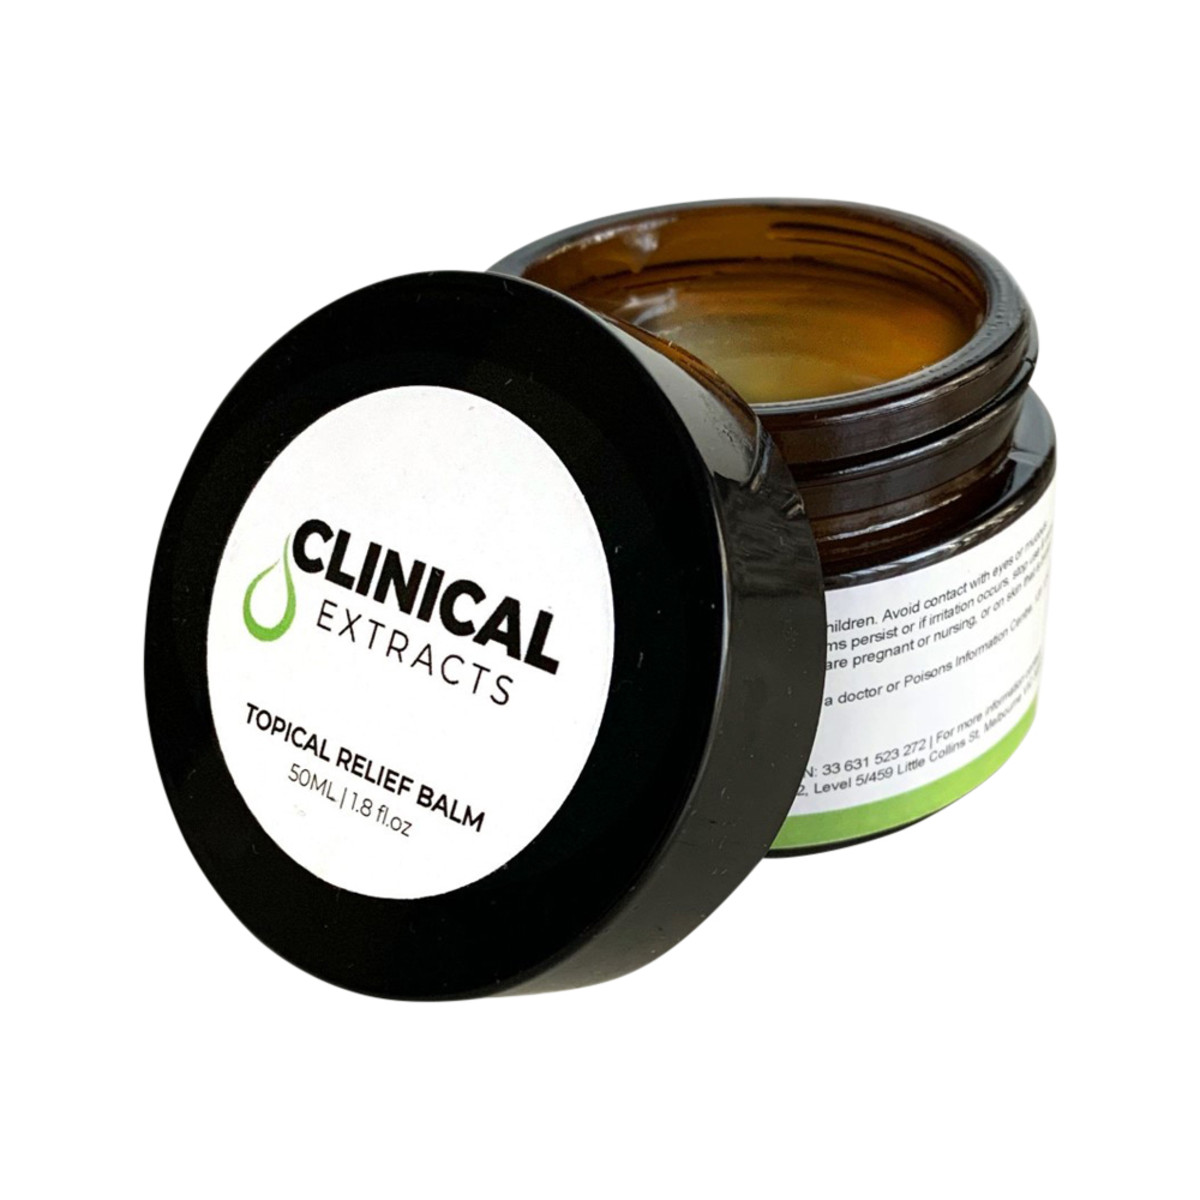 Clinical Extracts Topical Relief Balm